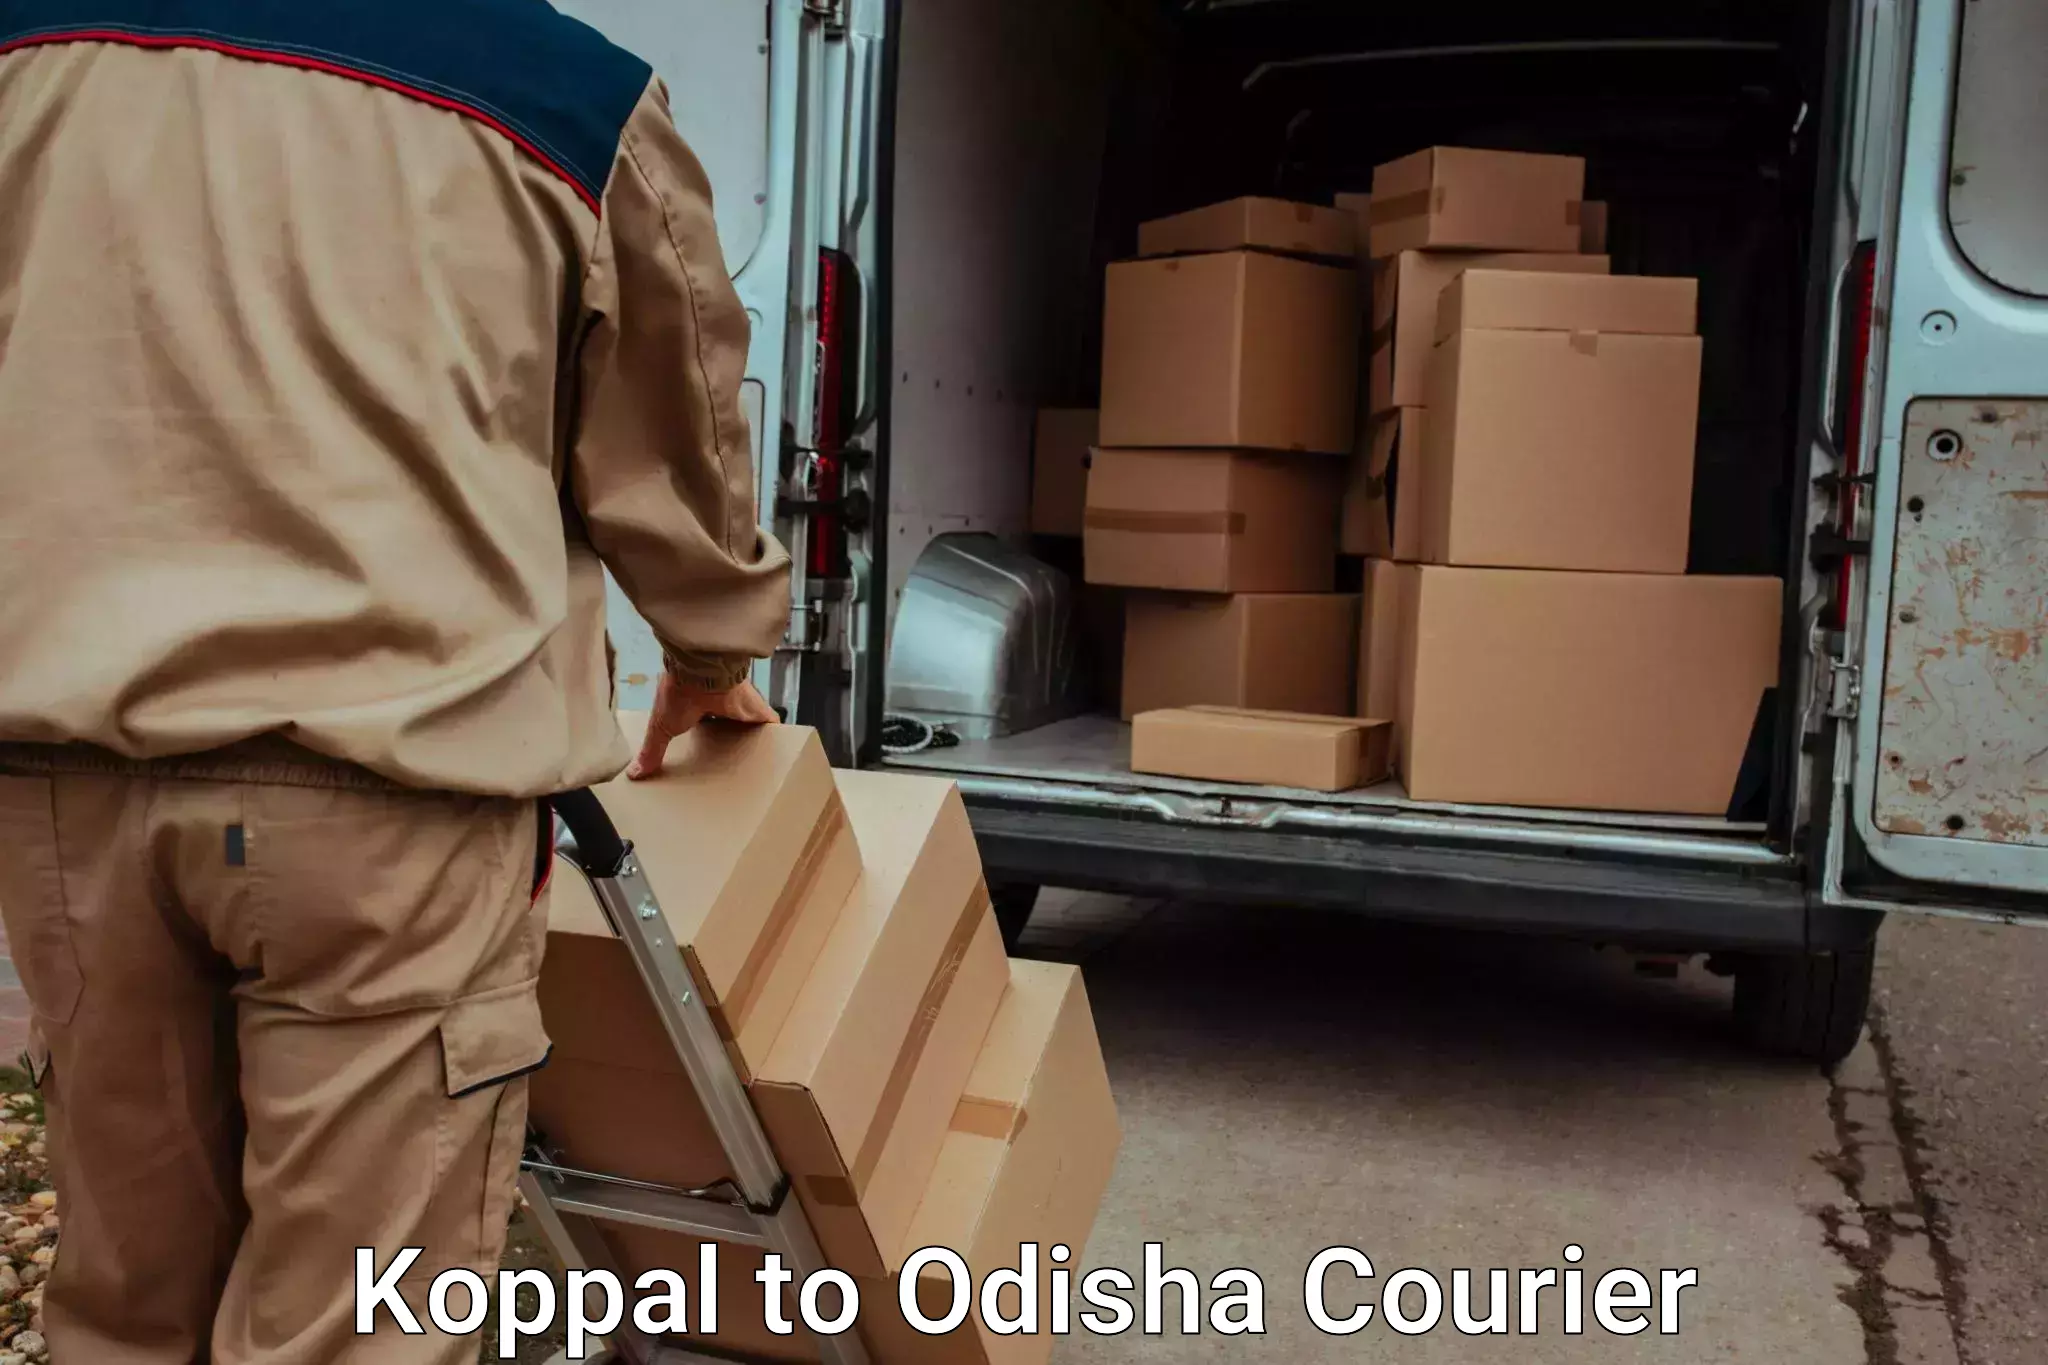 Instant baggage transport quote Koppal to Paradip Port